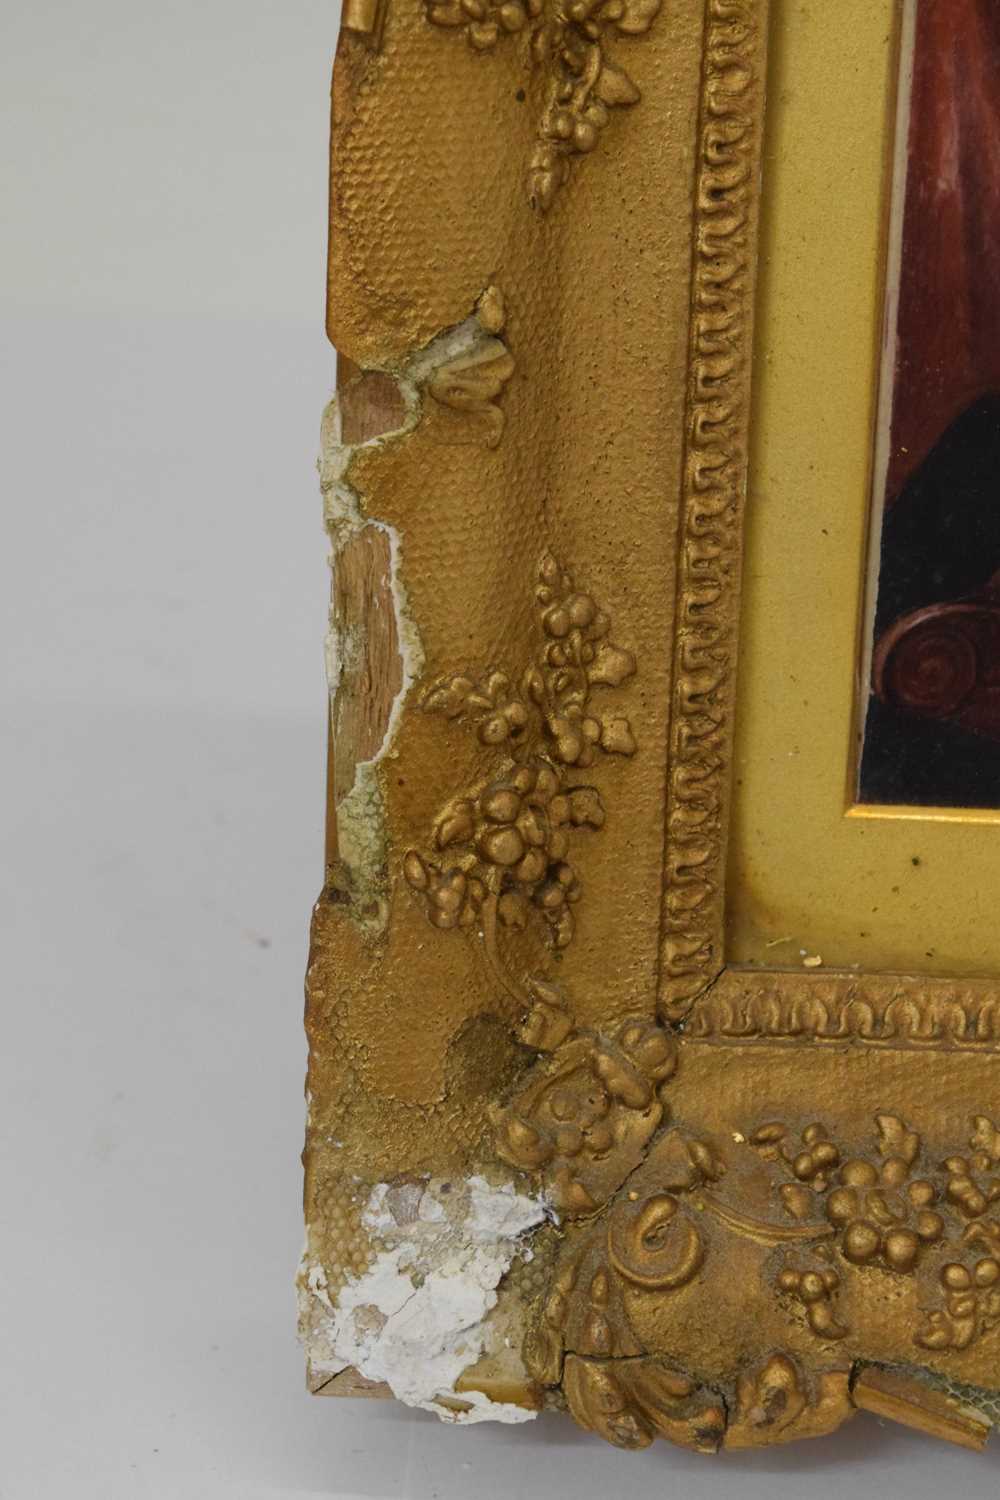 Attributed to William Hudson, (1803-1846) - Miniature portrait on ivory of a gentleman - Image 8 of 13